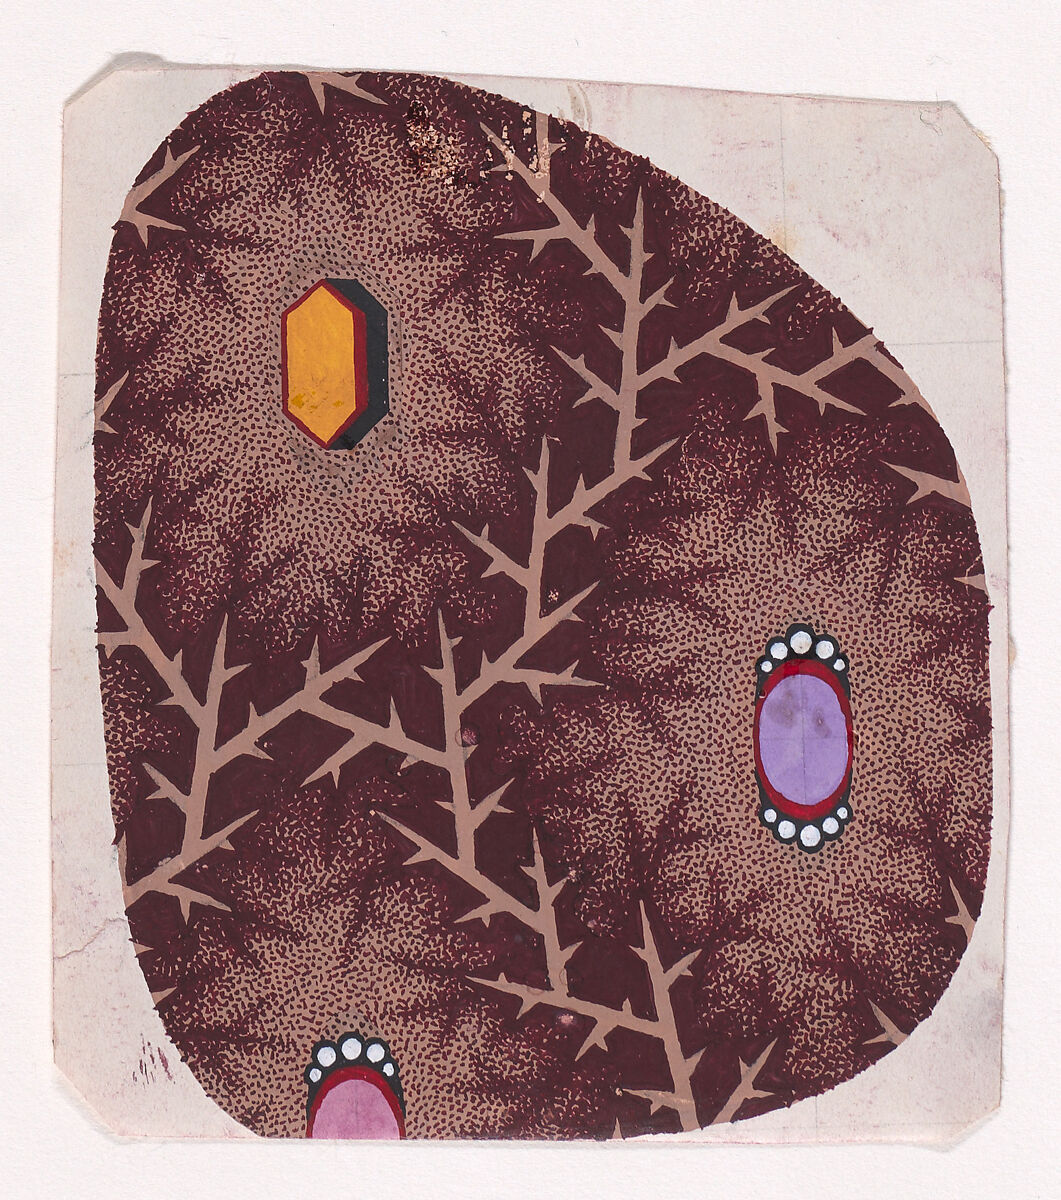 Textile Design with Alternating Rows of Hexagons and Ovals Flanked by Pearls Framed by a Network of Stiff Branches, Anonymous, Alsatian, 19th century, Gouache 